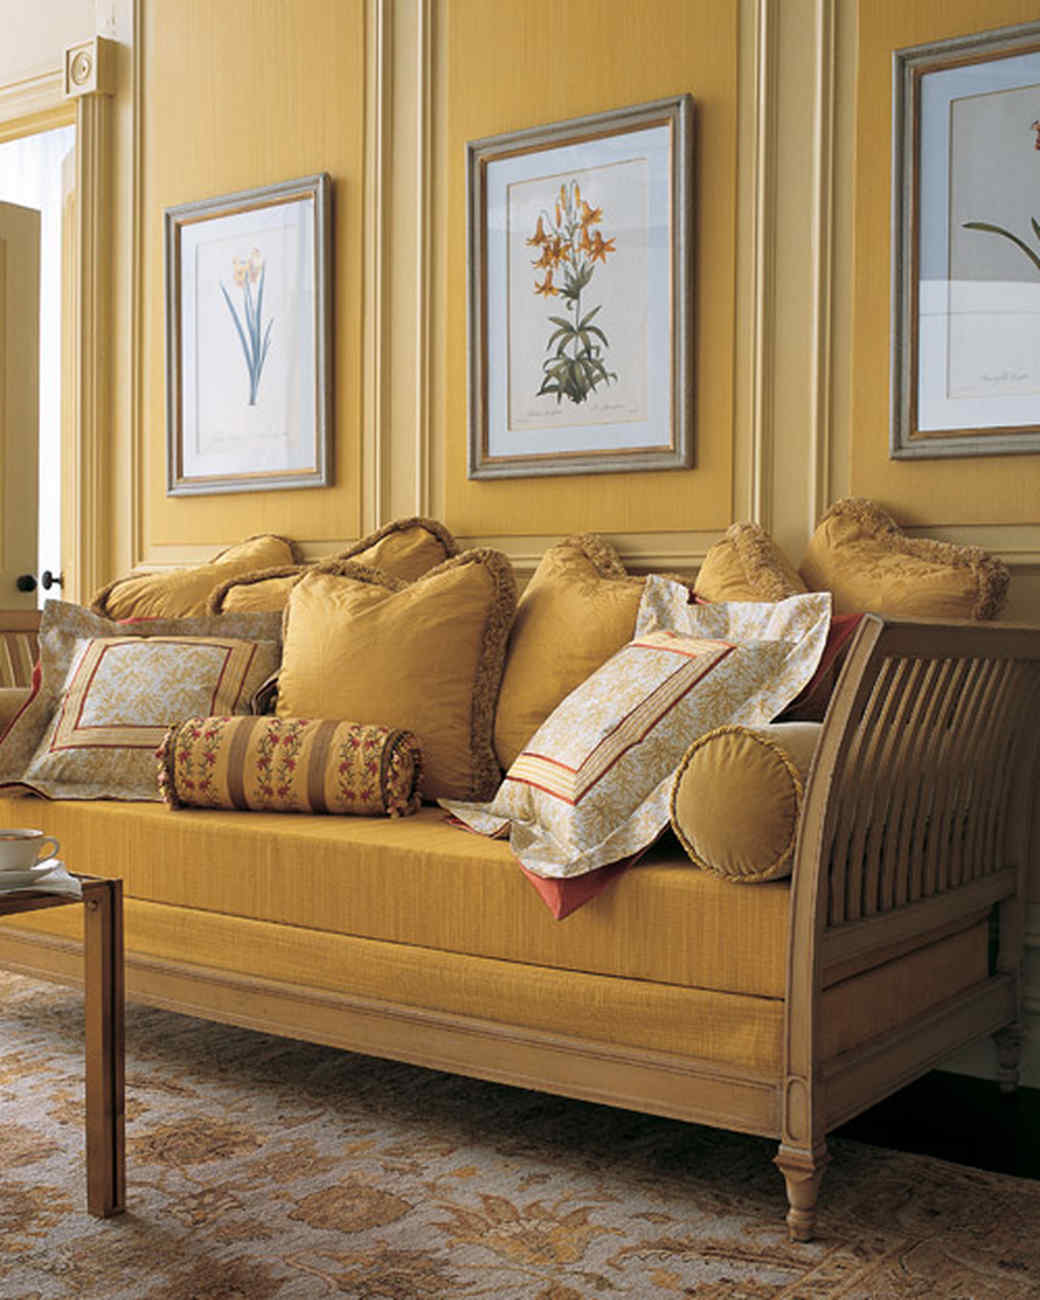 Decorating With Fall Colors Martha Stewart